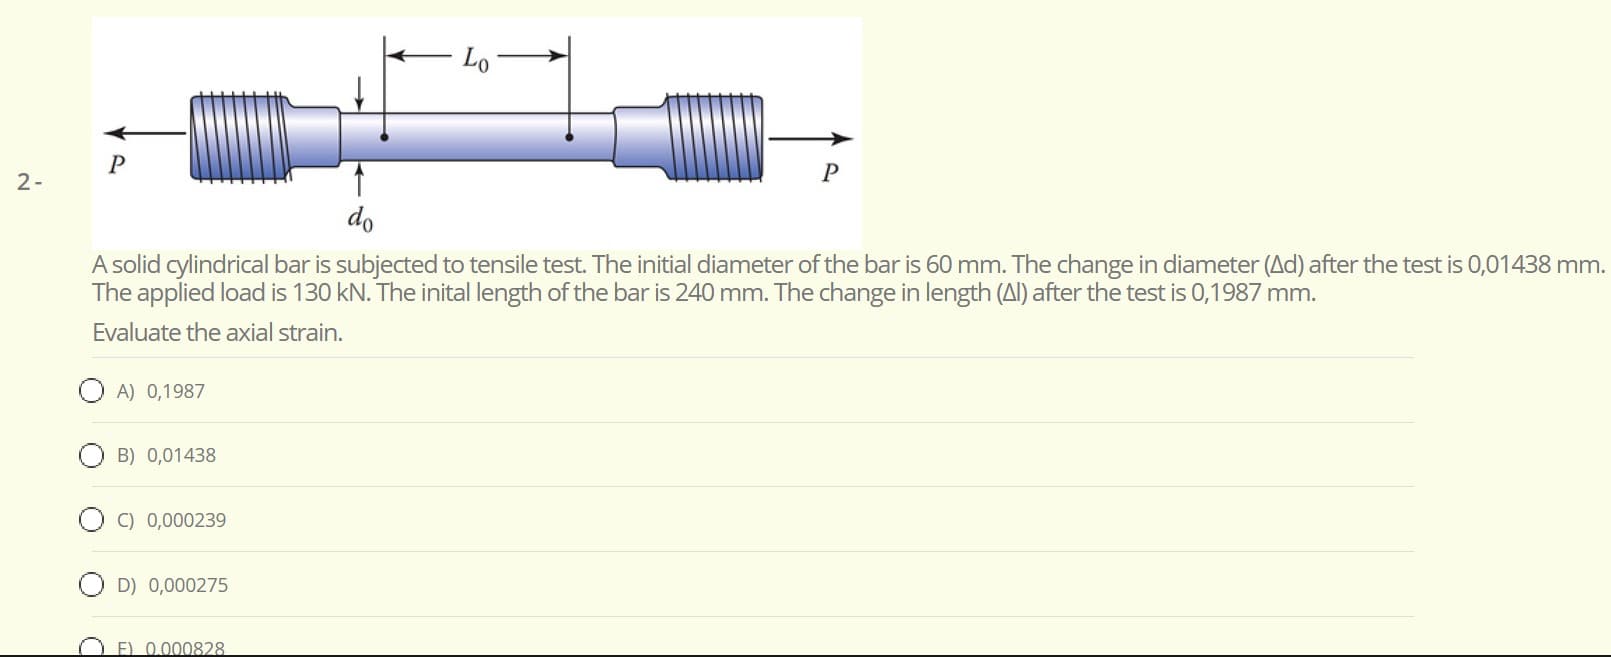 - Lo°
do
A solid cylindrical bar is subjected to tensile test. The initial diameter of the bar is 60 mm. The change in diameter (Ad) after the test is 0,01438 mn
The applied load is 130 kN. The inital length of the bar is 240 mm. The change in length (Al) after the test is 0,1987 mm.
Evaluate the axial strain.
O A) 0,1987
O B) 0,01438
C) 0,000239
O D) 0,000275
E) 0.000828
